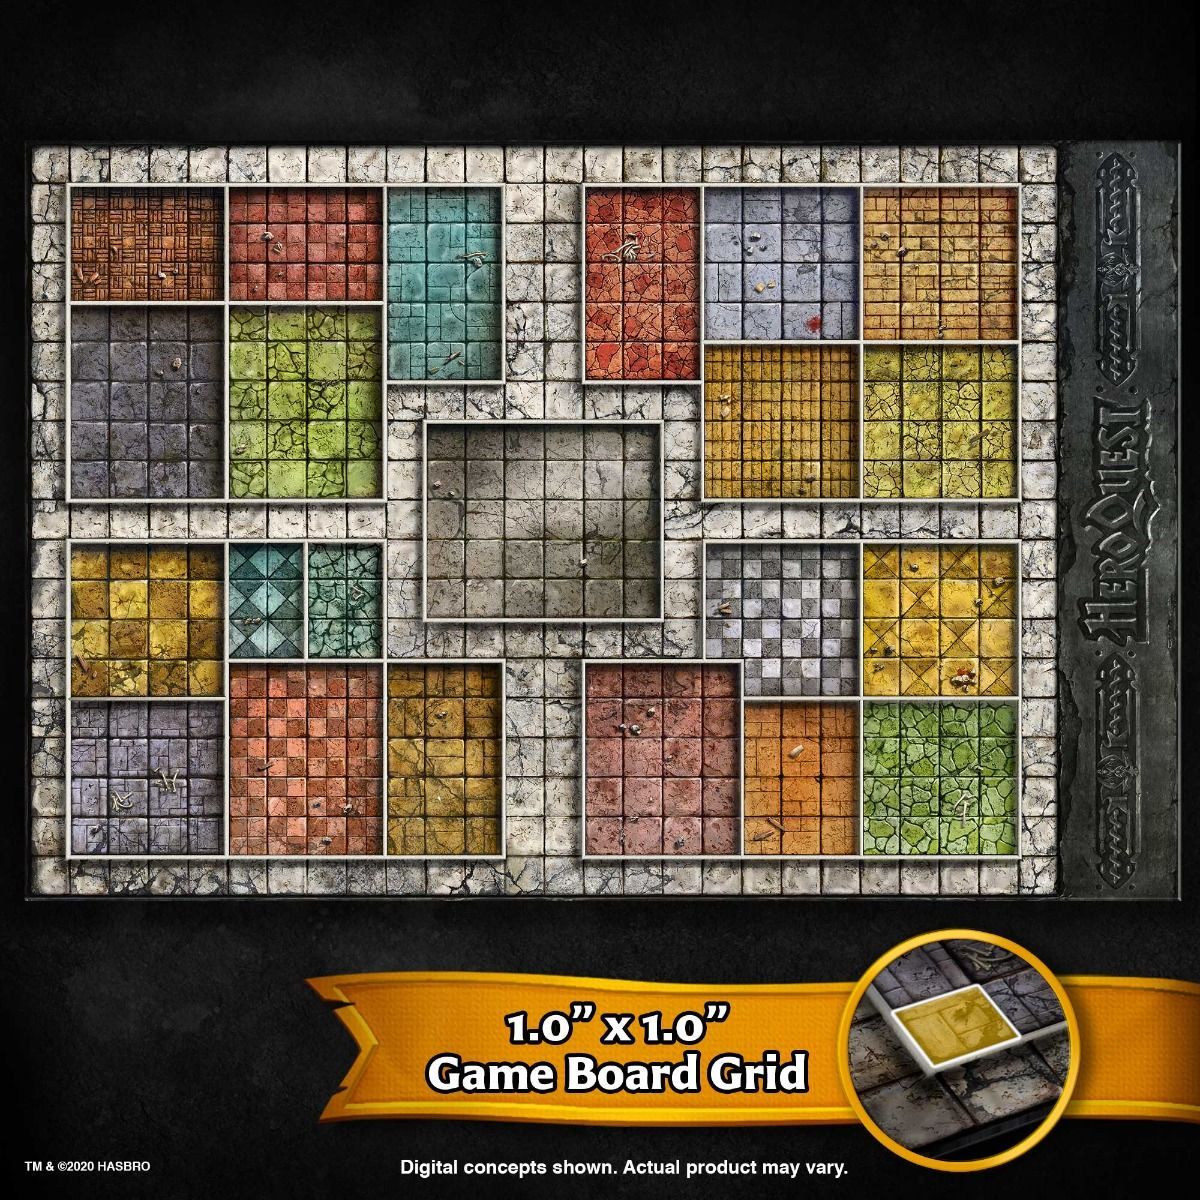 HeroQuest (Base Game)